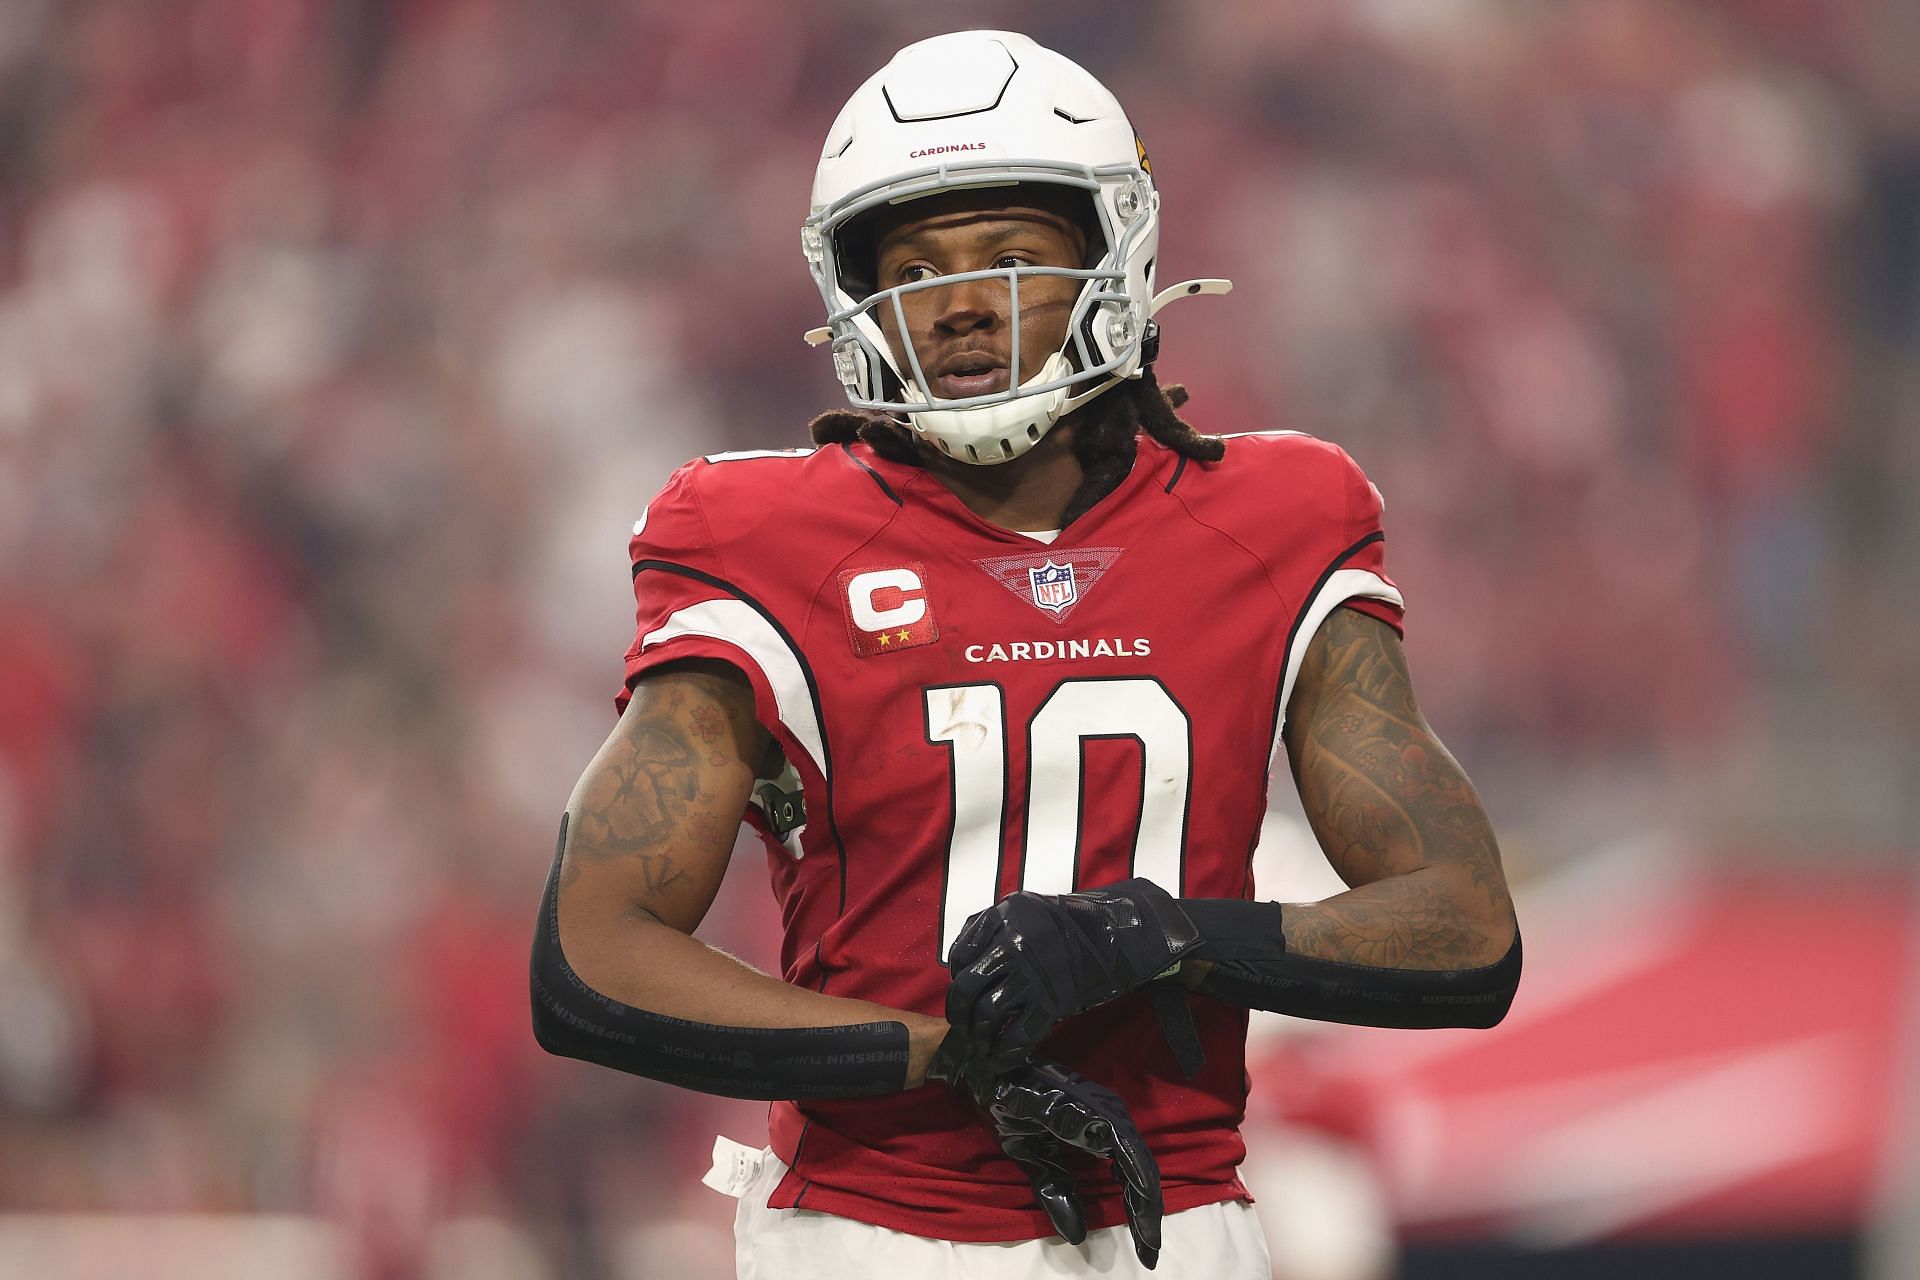 Why did the Houston Texans trade DeAndre Hopkins to the Arizona Cardinals?